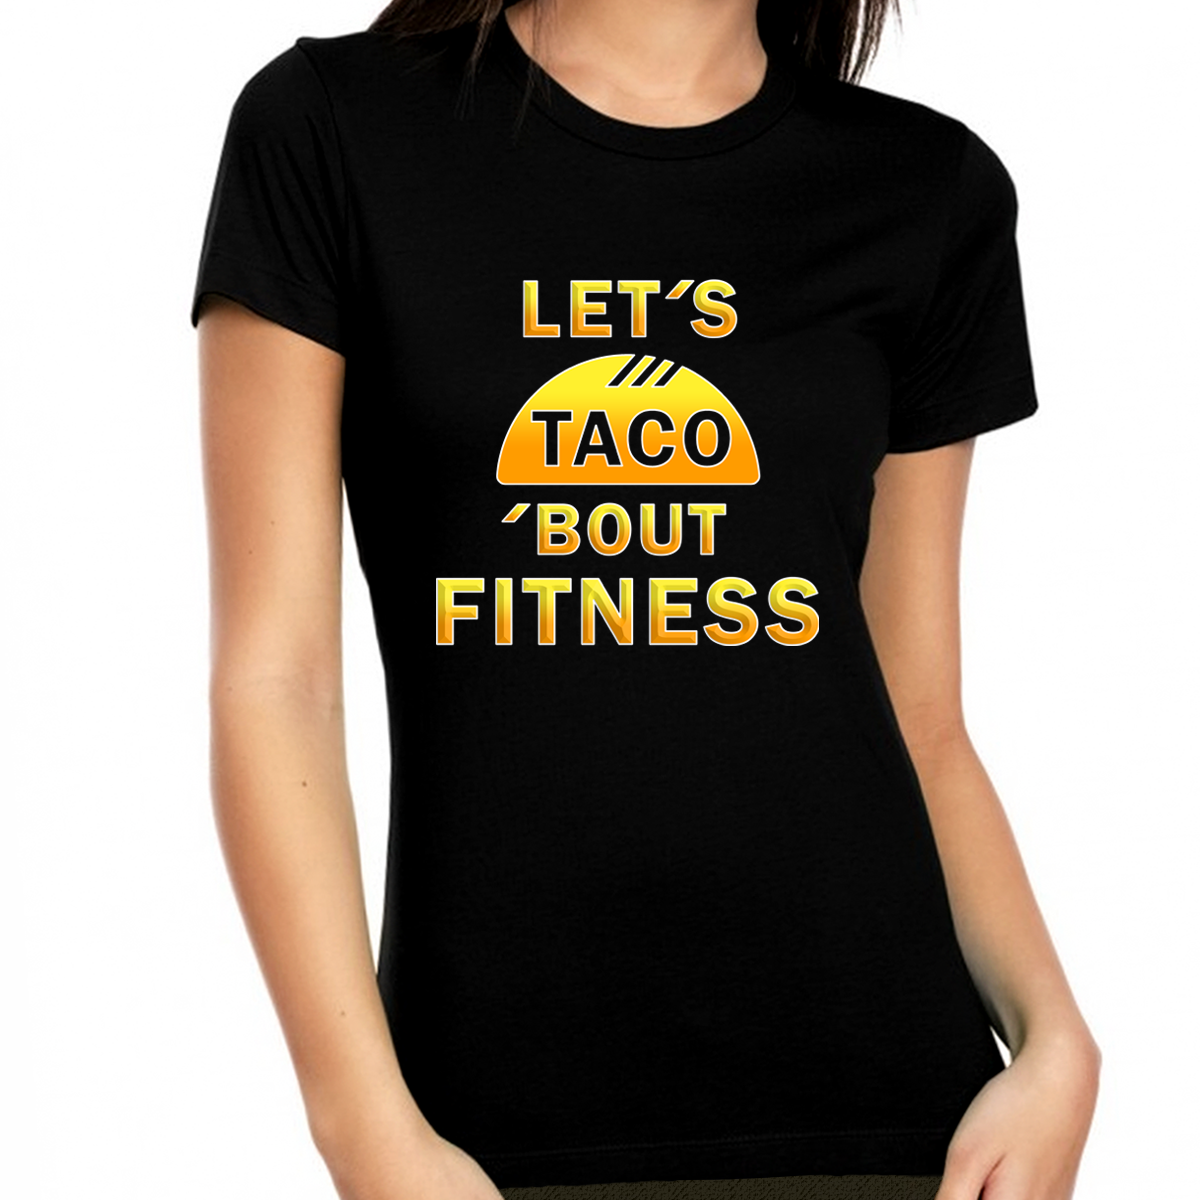 Womens Taco Shirt Funny Fitness Humorous Gym Novelty Gift Graphic T-Shirt for Women